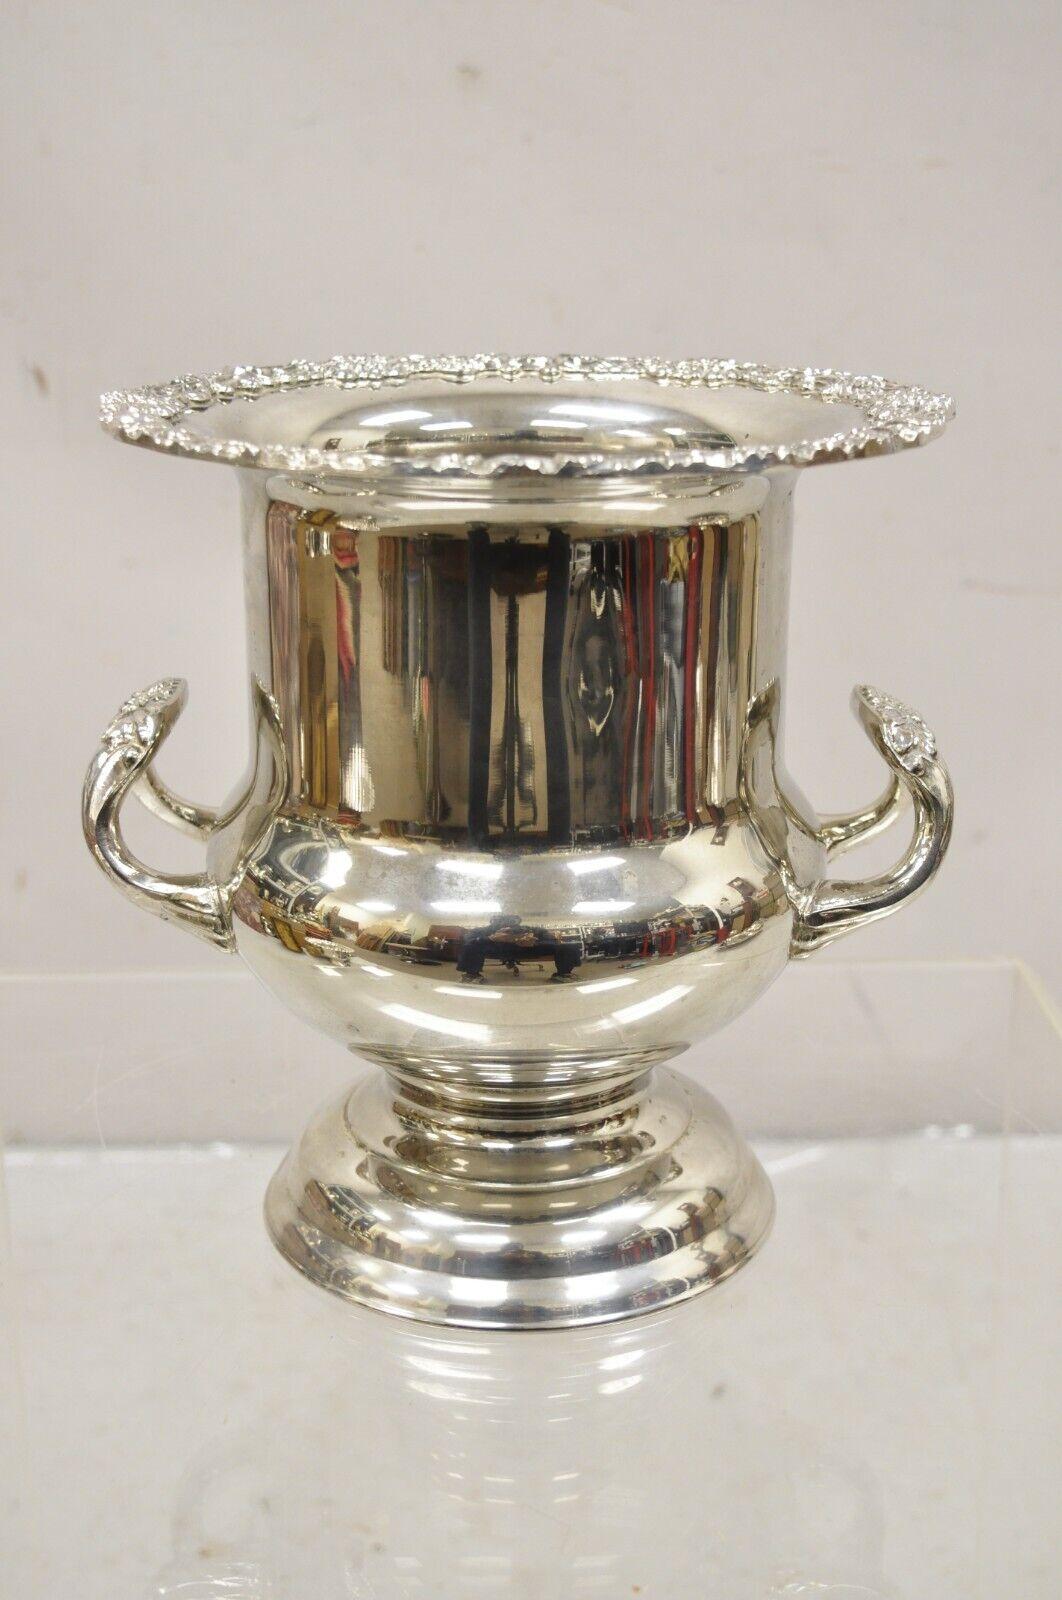 Vintage Victorian Style Silver Plated Trophy Cup Champagne Chiller Ice Bucket. Circa late 20th Century. Measurements: 9.5